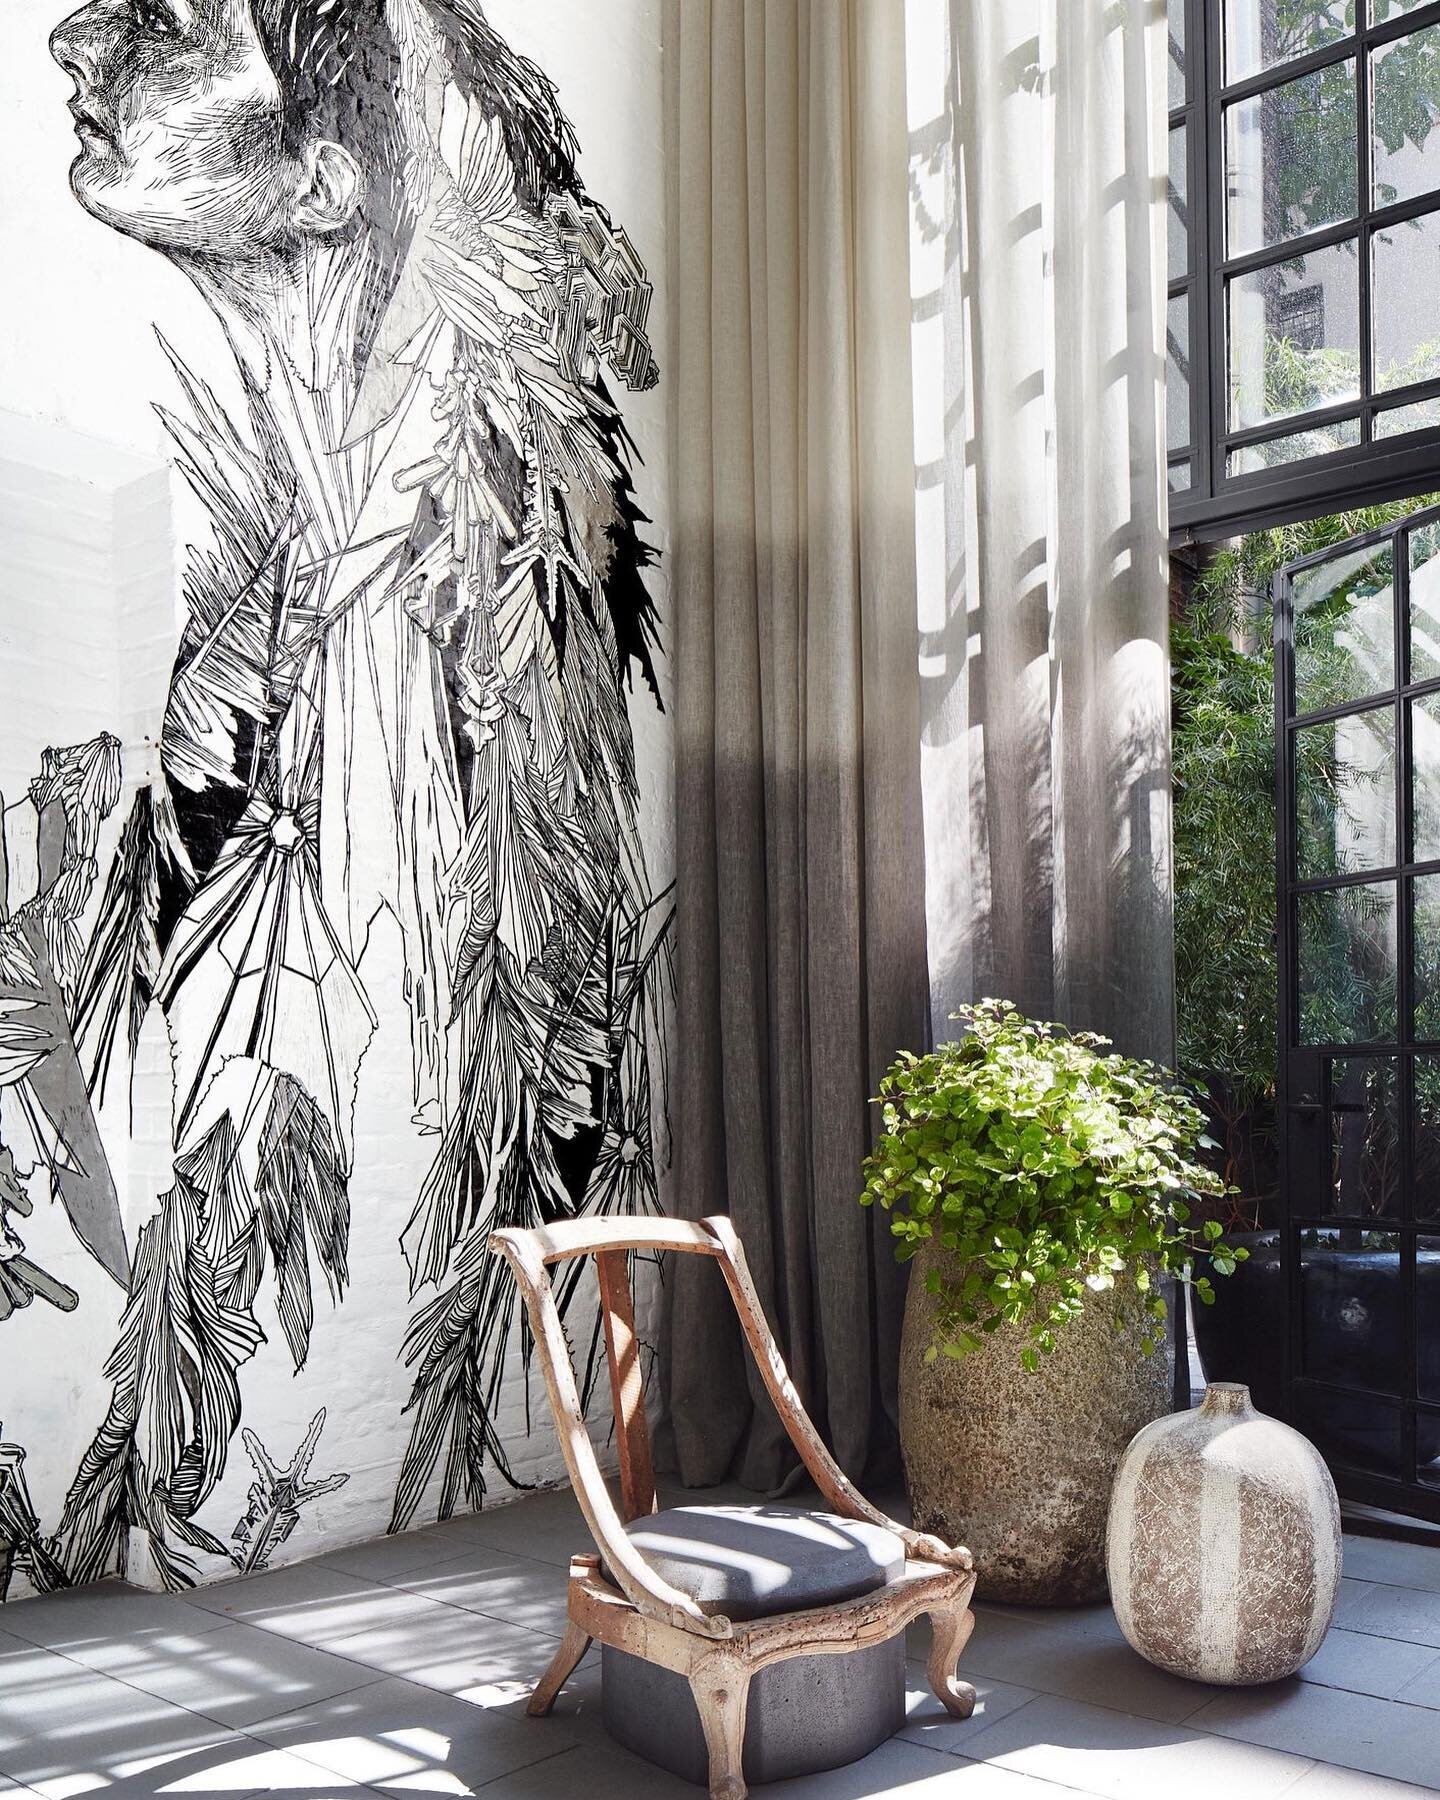 Today&rsquo;s post is from Monique Gibson&rsquo;s own New York townhouse. Wall mural by Swoon is accompanied by a James Plumb sculpture chair in the hall. Opposite the mural is the beautiful, airy open kitchen featuring a pebble desk by Gal Gaon that